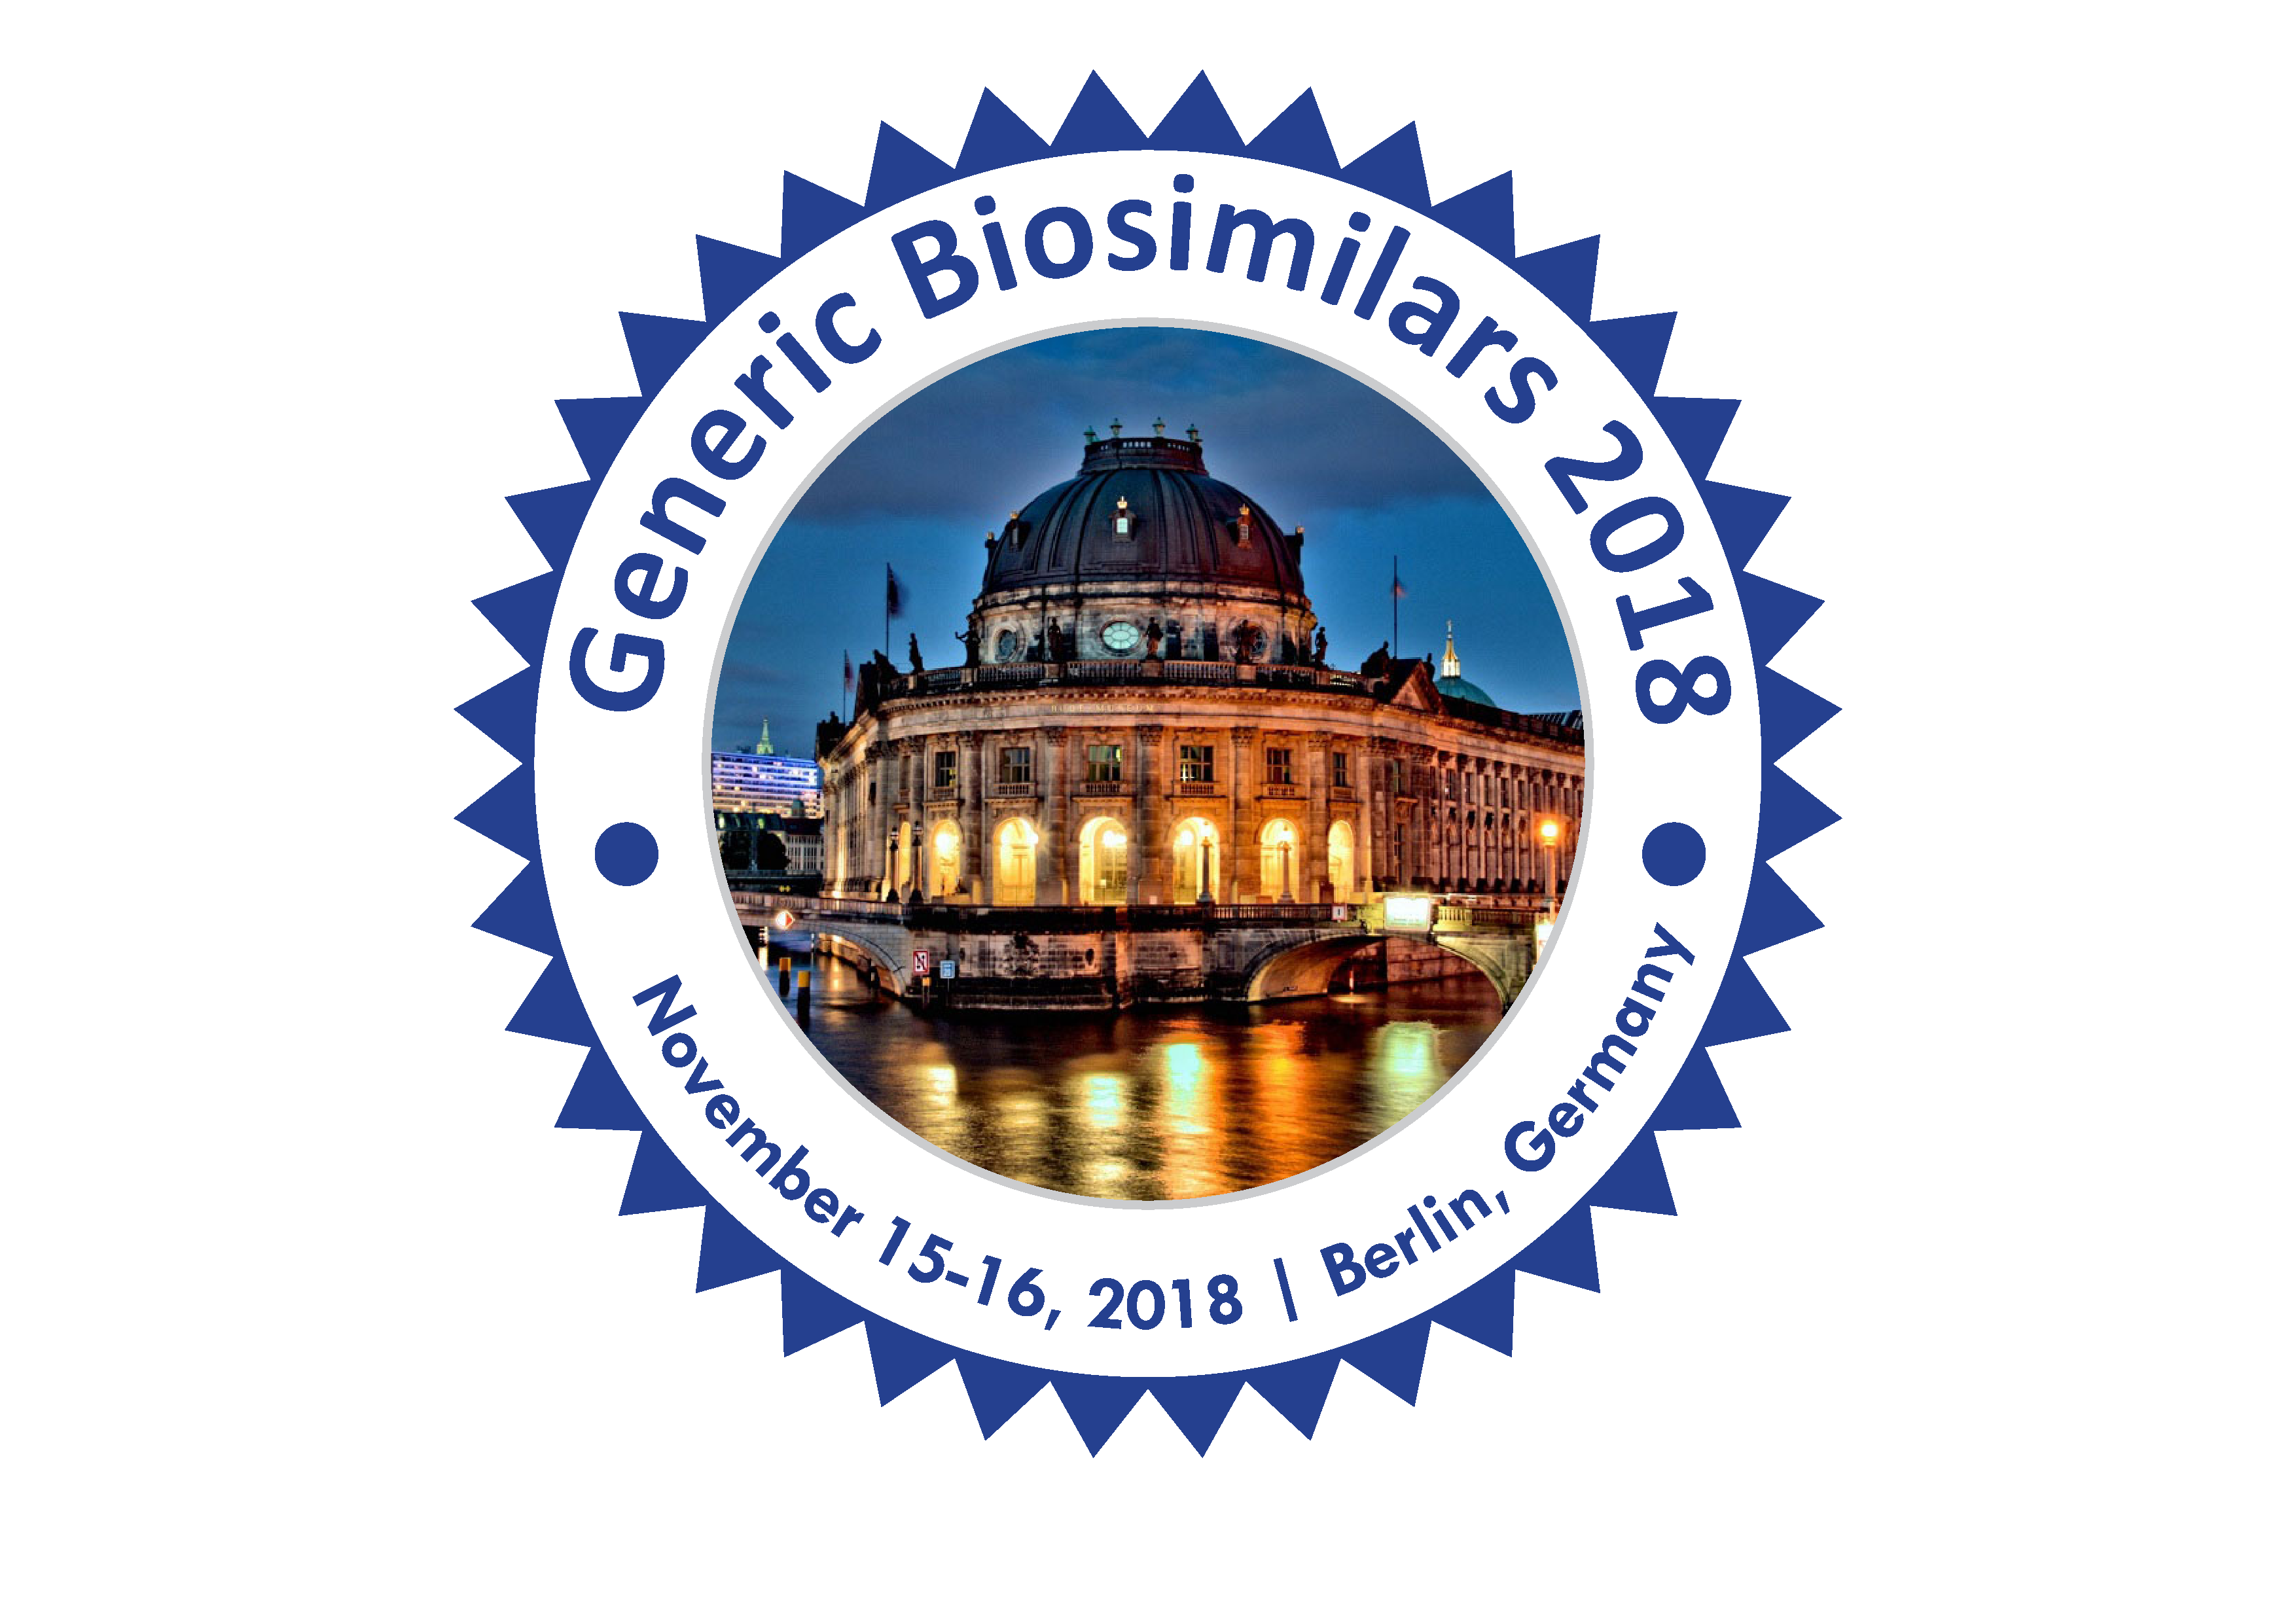 14th International Conference on Generic Drugs and Biosimilars, Berlin, Germany